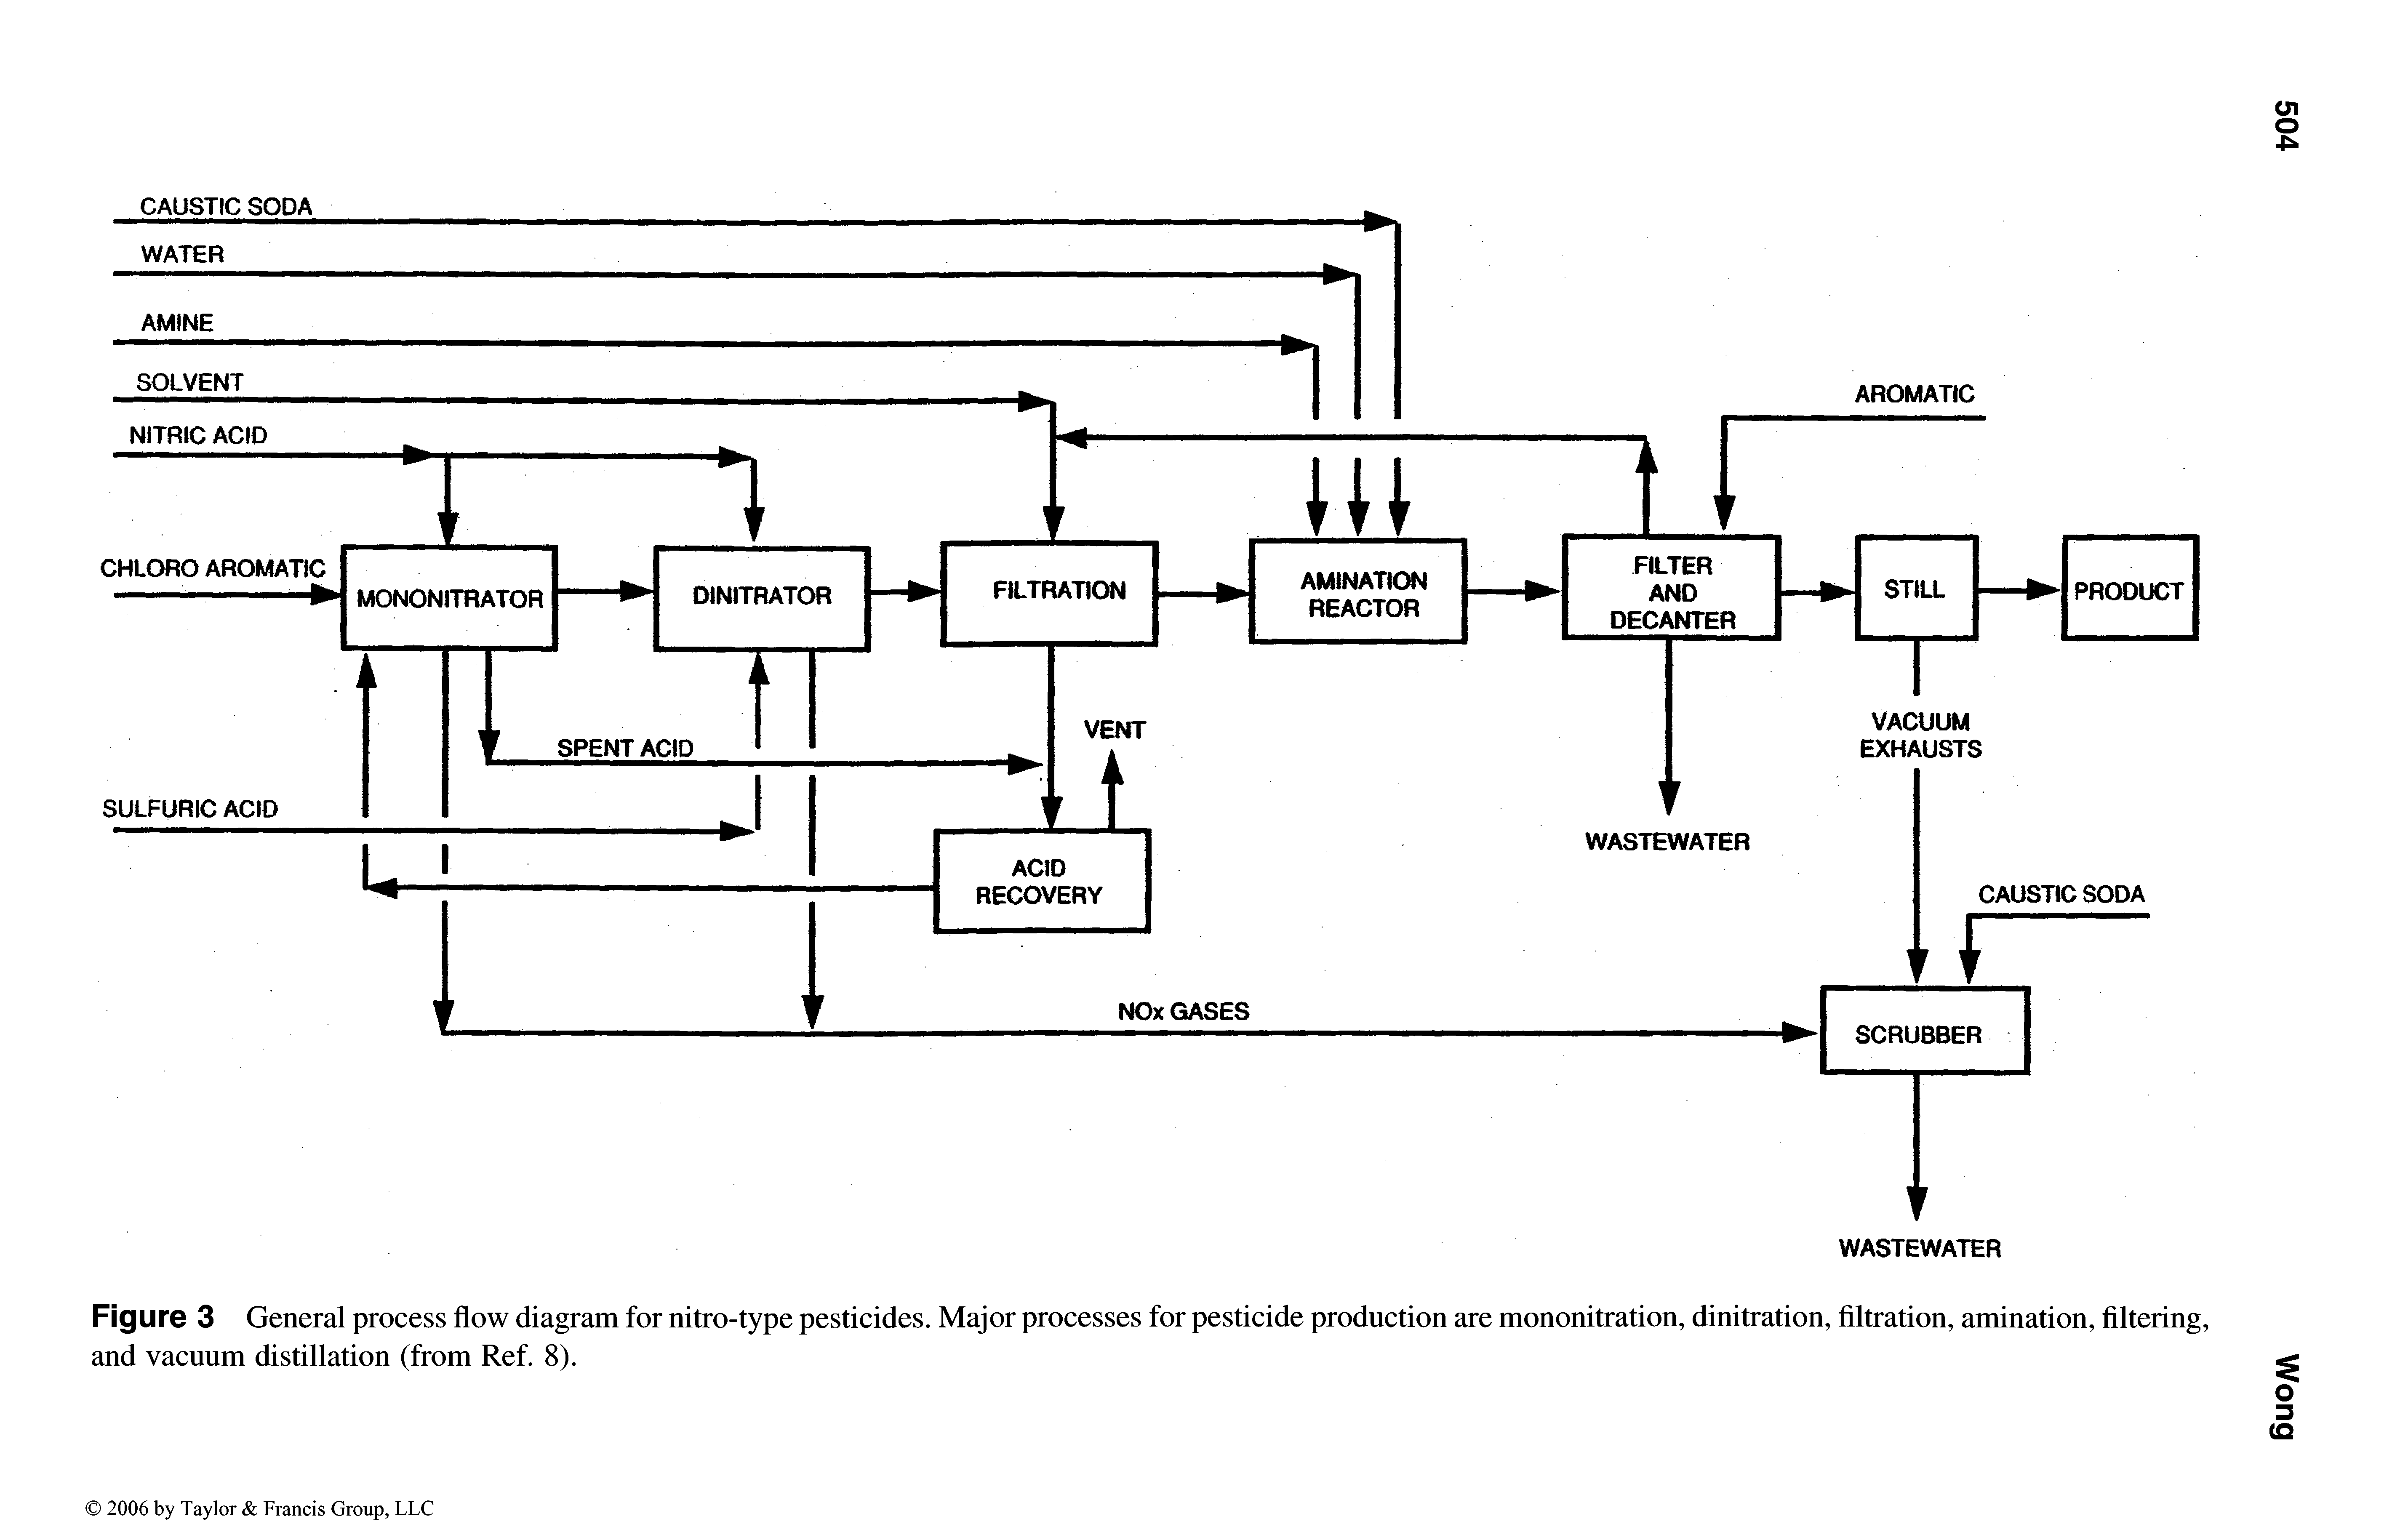 Figure 3 General process flow diagram for nitro-type pesticides. Major processes for pesticide production are mononitration, dinitration, filtration, amination, filtering, and vacuum distillation (from Ref. 8). ...